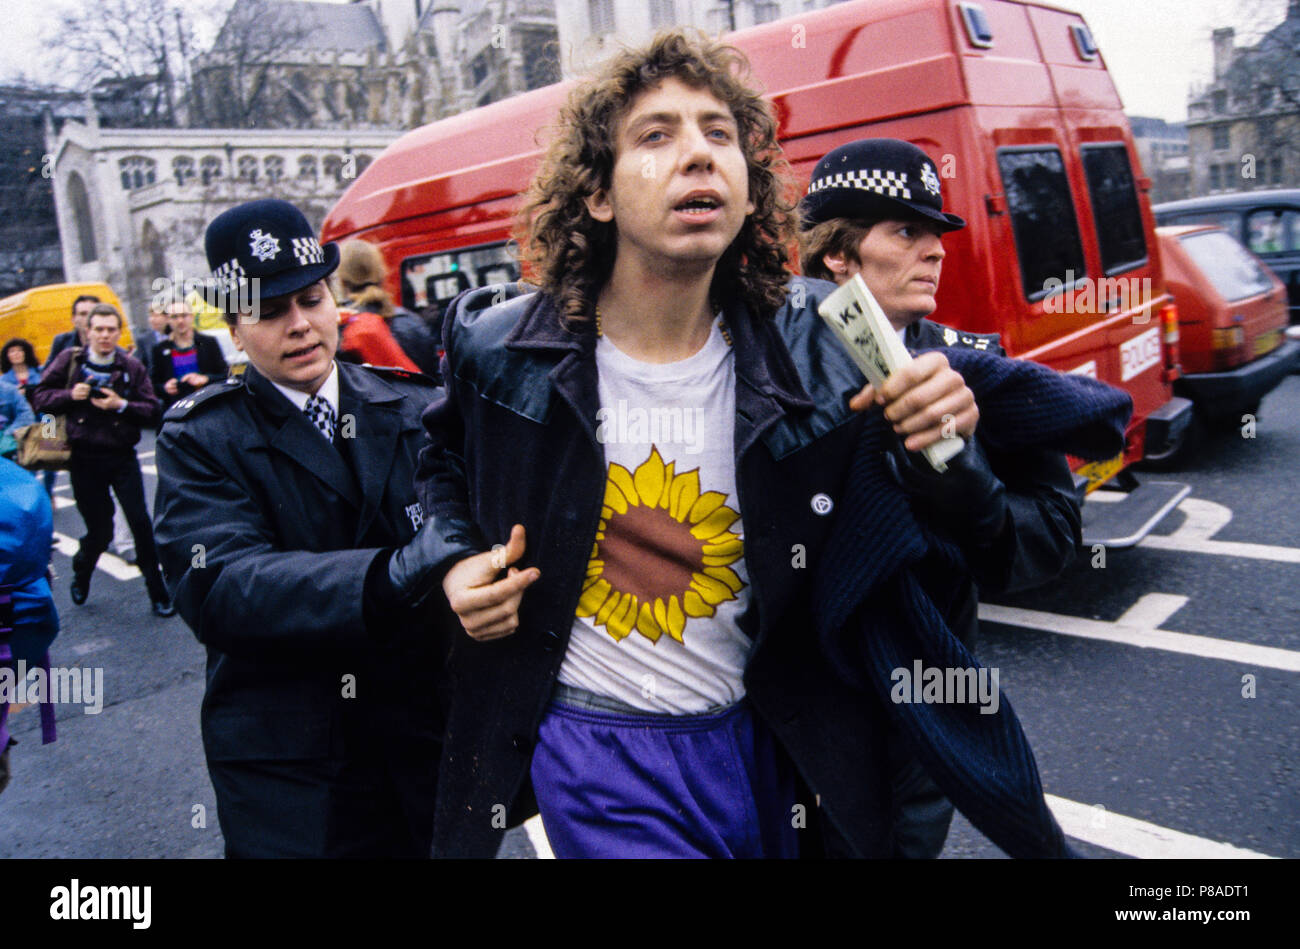 Earth First Activist Being Arrested at Rainforest Protest outside Houses of Parliament, London, England, UK, GB. Stock Photo